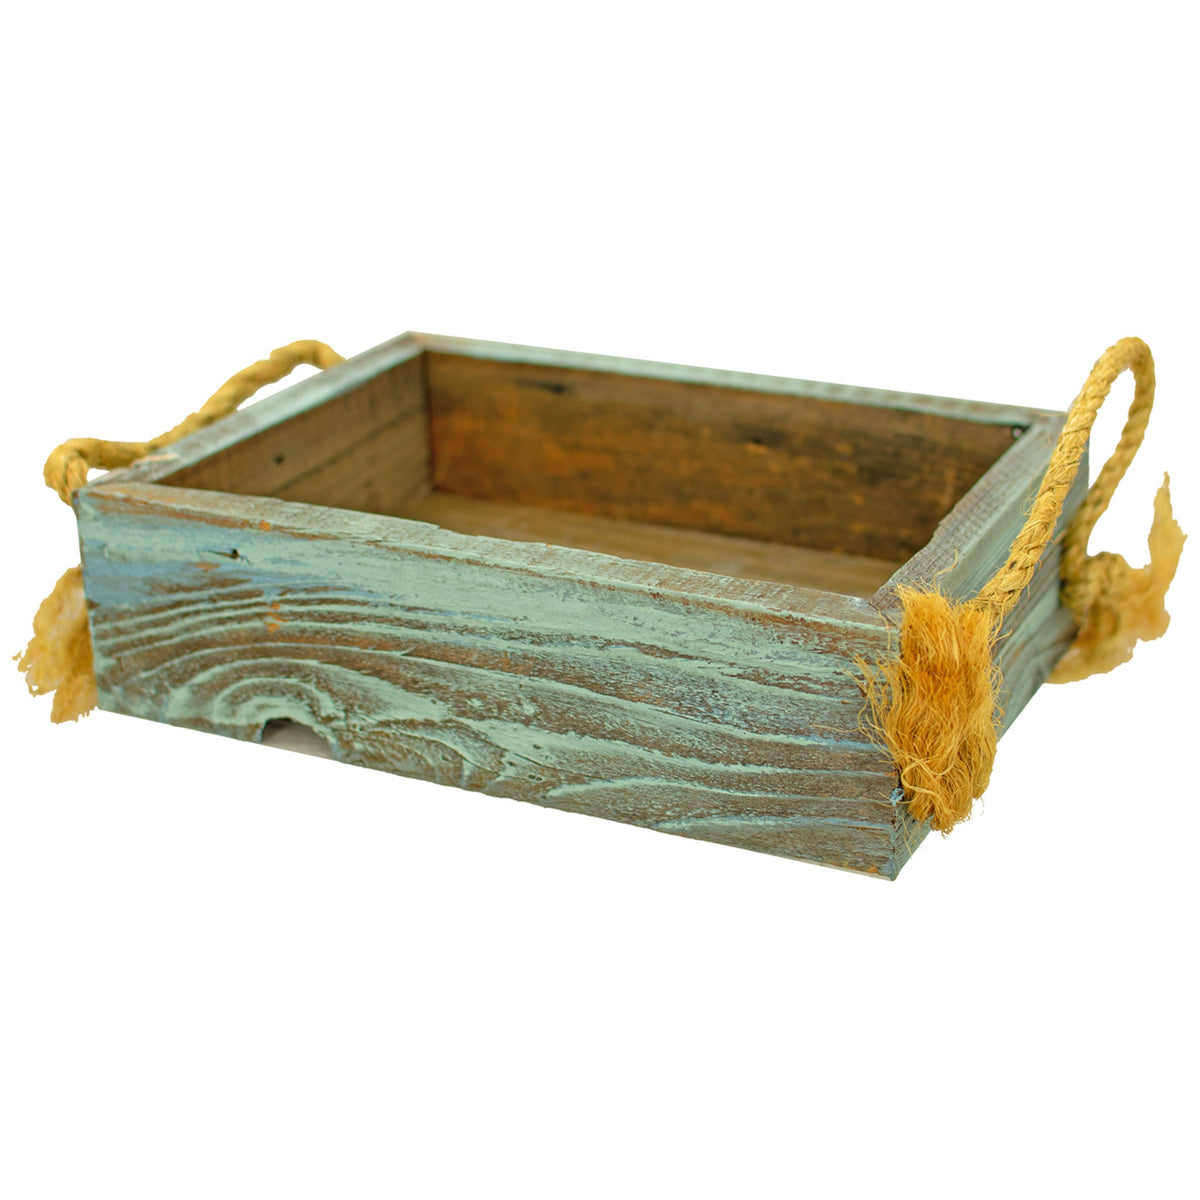 Rustic Redwood Planter Box with Rope Handles